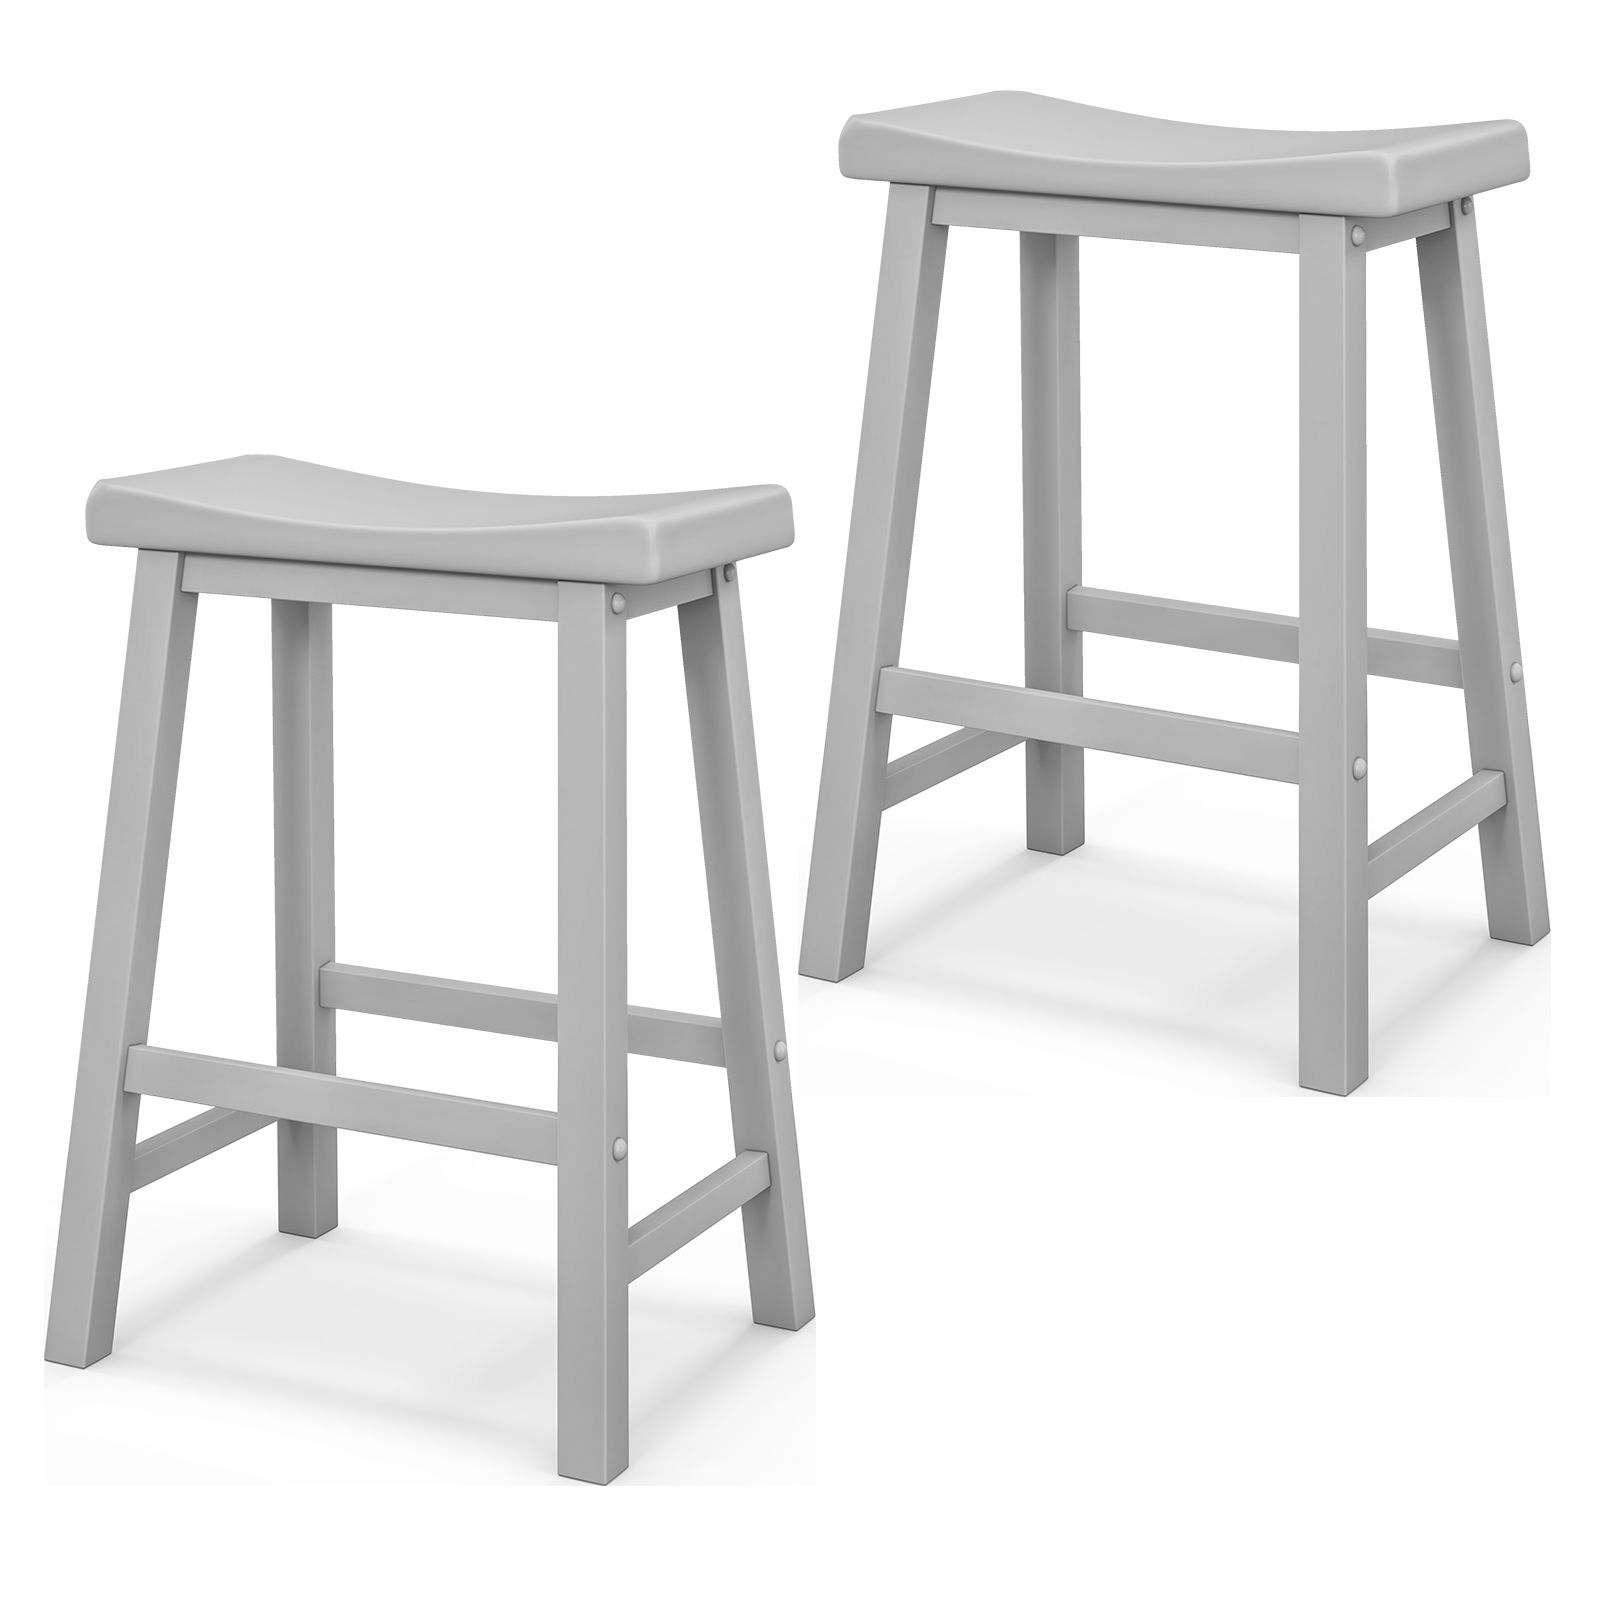 Saddle Stools Set of 2 with Solid Wood Legs and Footrests Grey